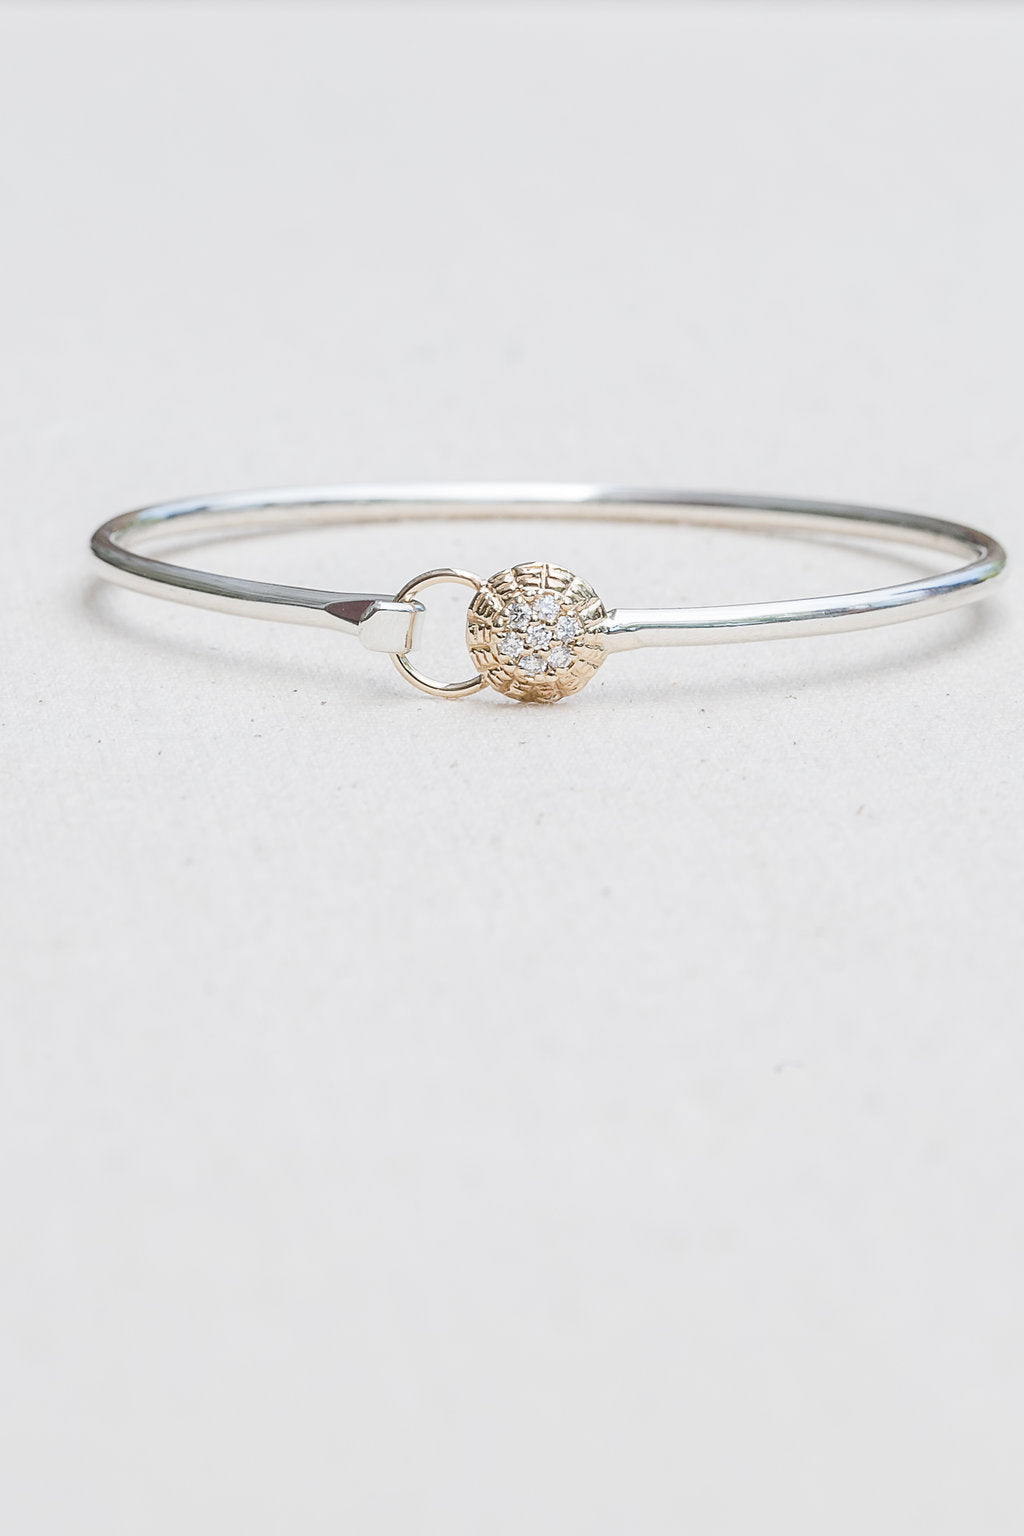 Diamond Nantucket Basket Top Bangle Sterling Silver and 14K Gold handmade by Jewel in the Sea Nantucket